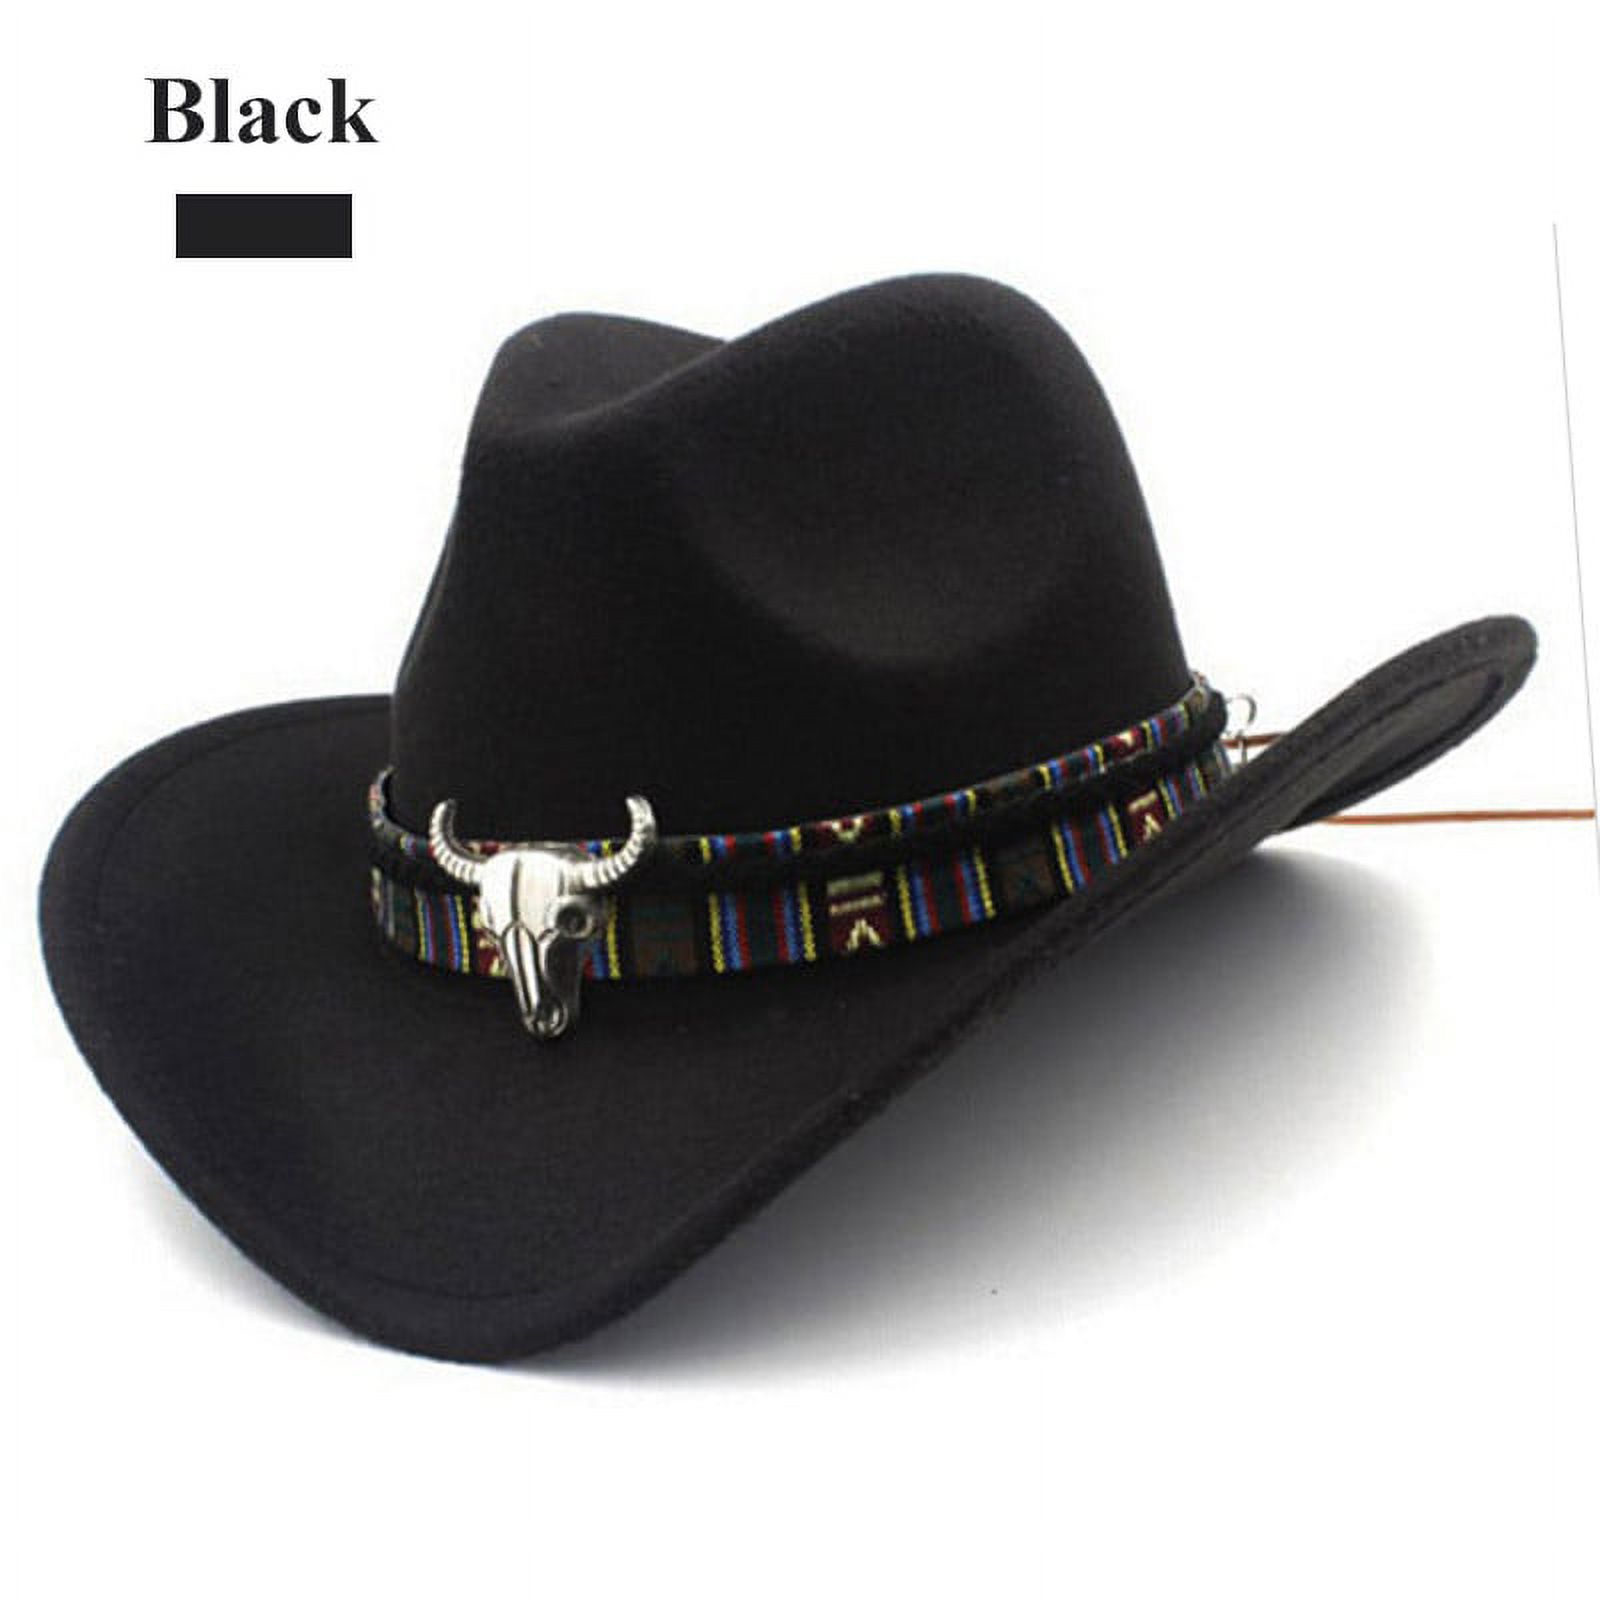 Outdoor Casual Fashion Personality hat Summer Spring Autumn Winter Wool Hat Women Men Ethnic Style Western Cowboy Hat for Lady Tassel Felt Cowgirl Sombrero Caps Travel Sun Hat Wild hat - image 4 of 8